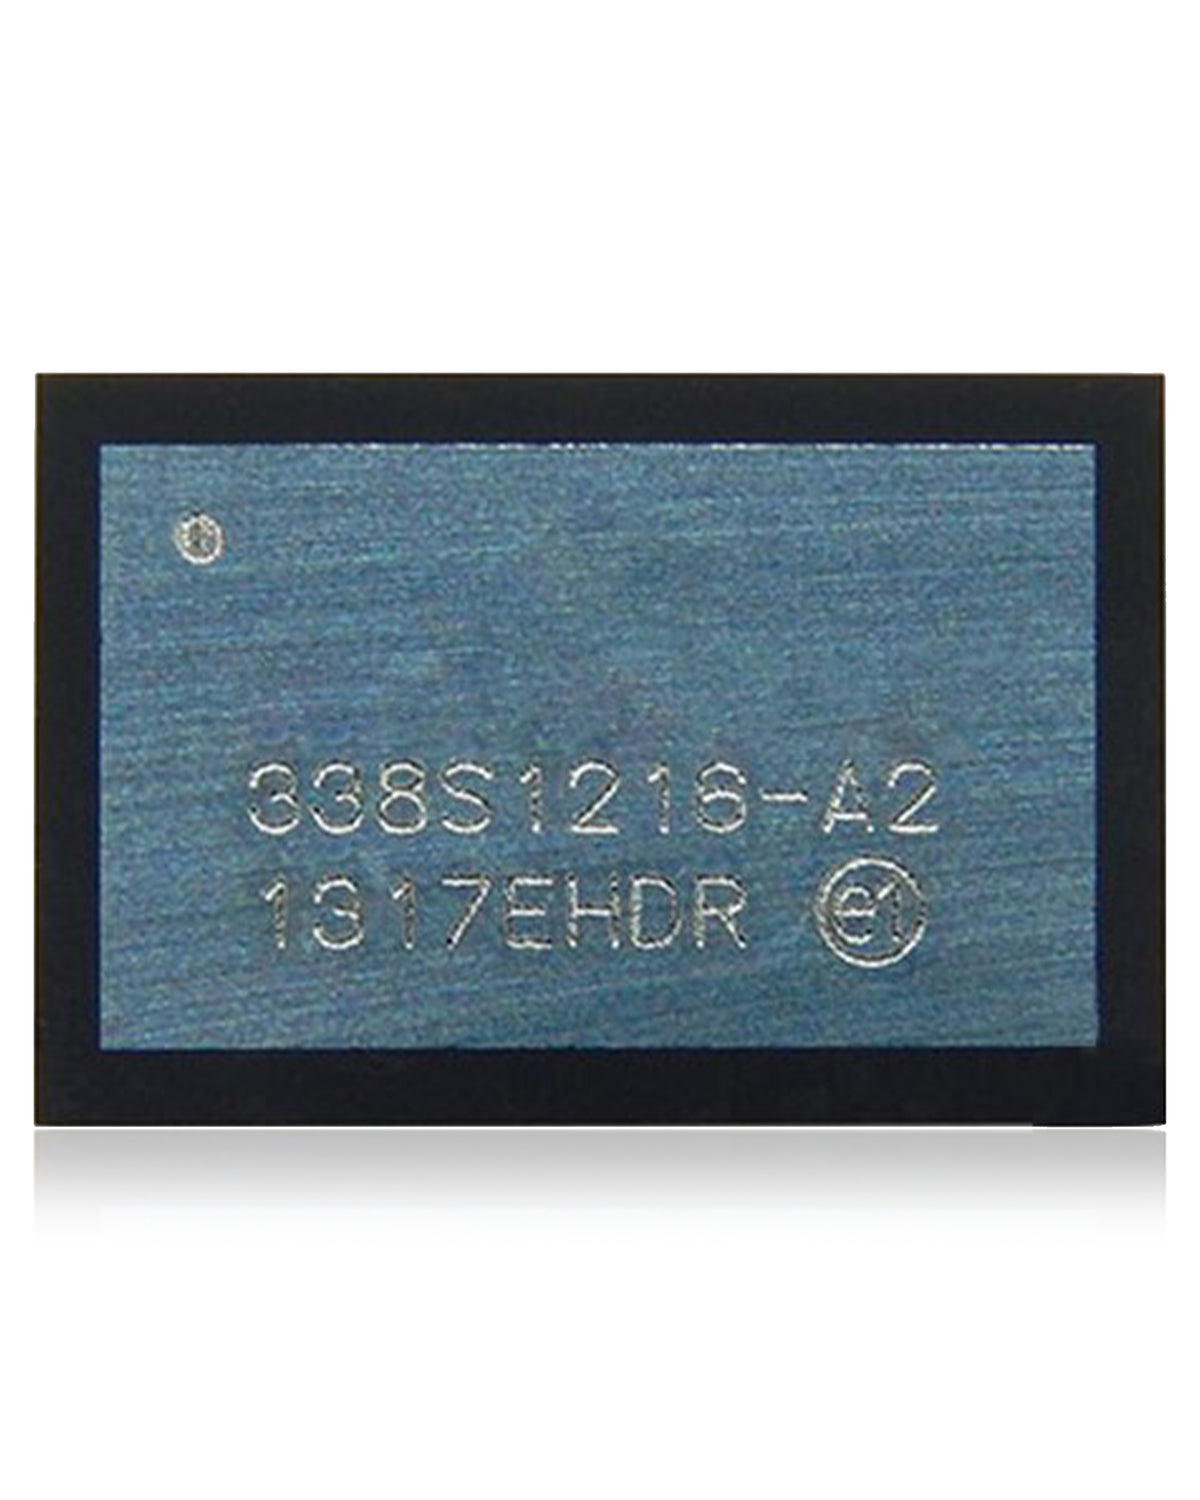 POWER MANAGEMENT IC (BIG) COMPATIBLE WITH IPHONE 5S (U7 338S1216 / 338S1166)